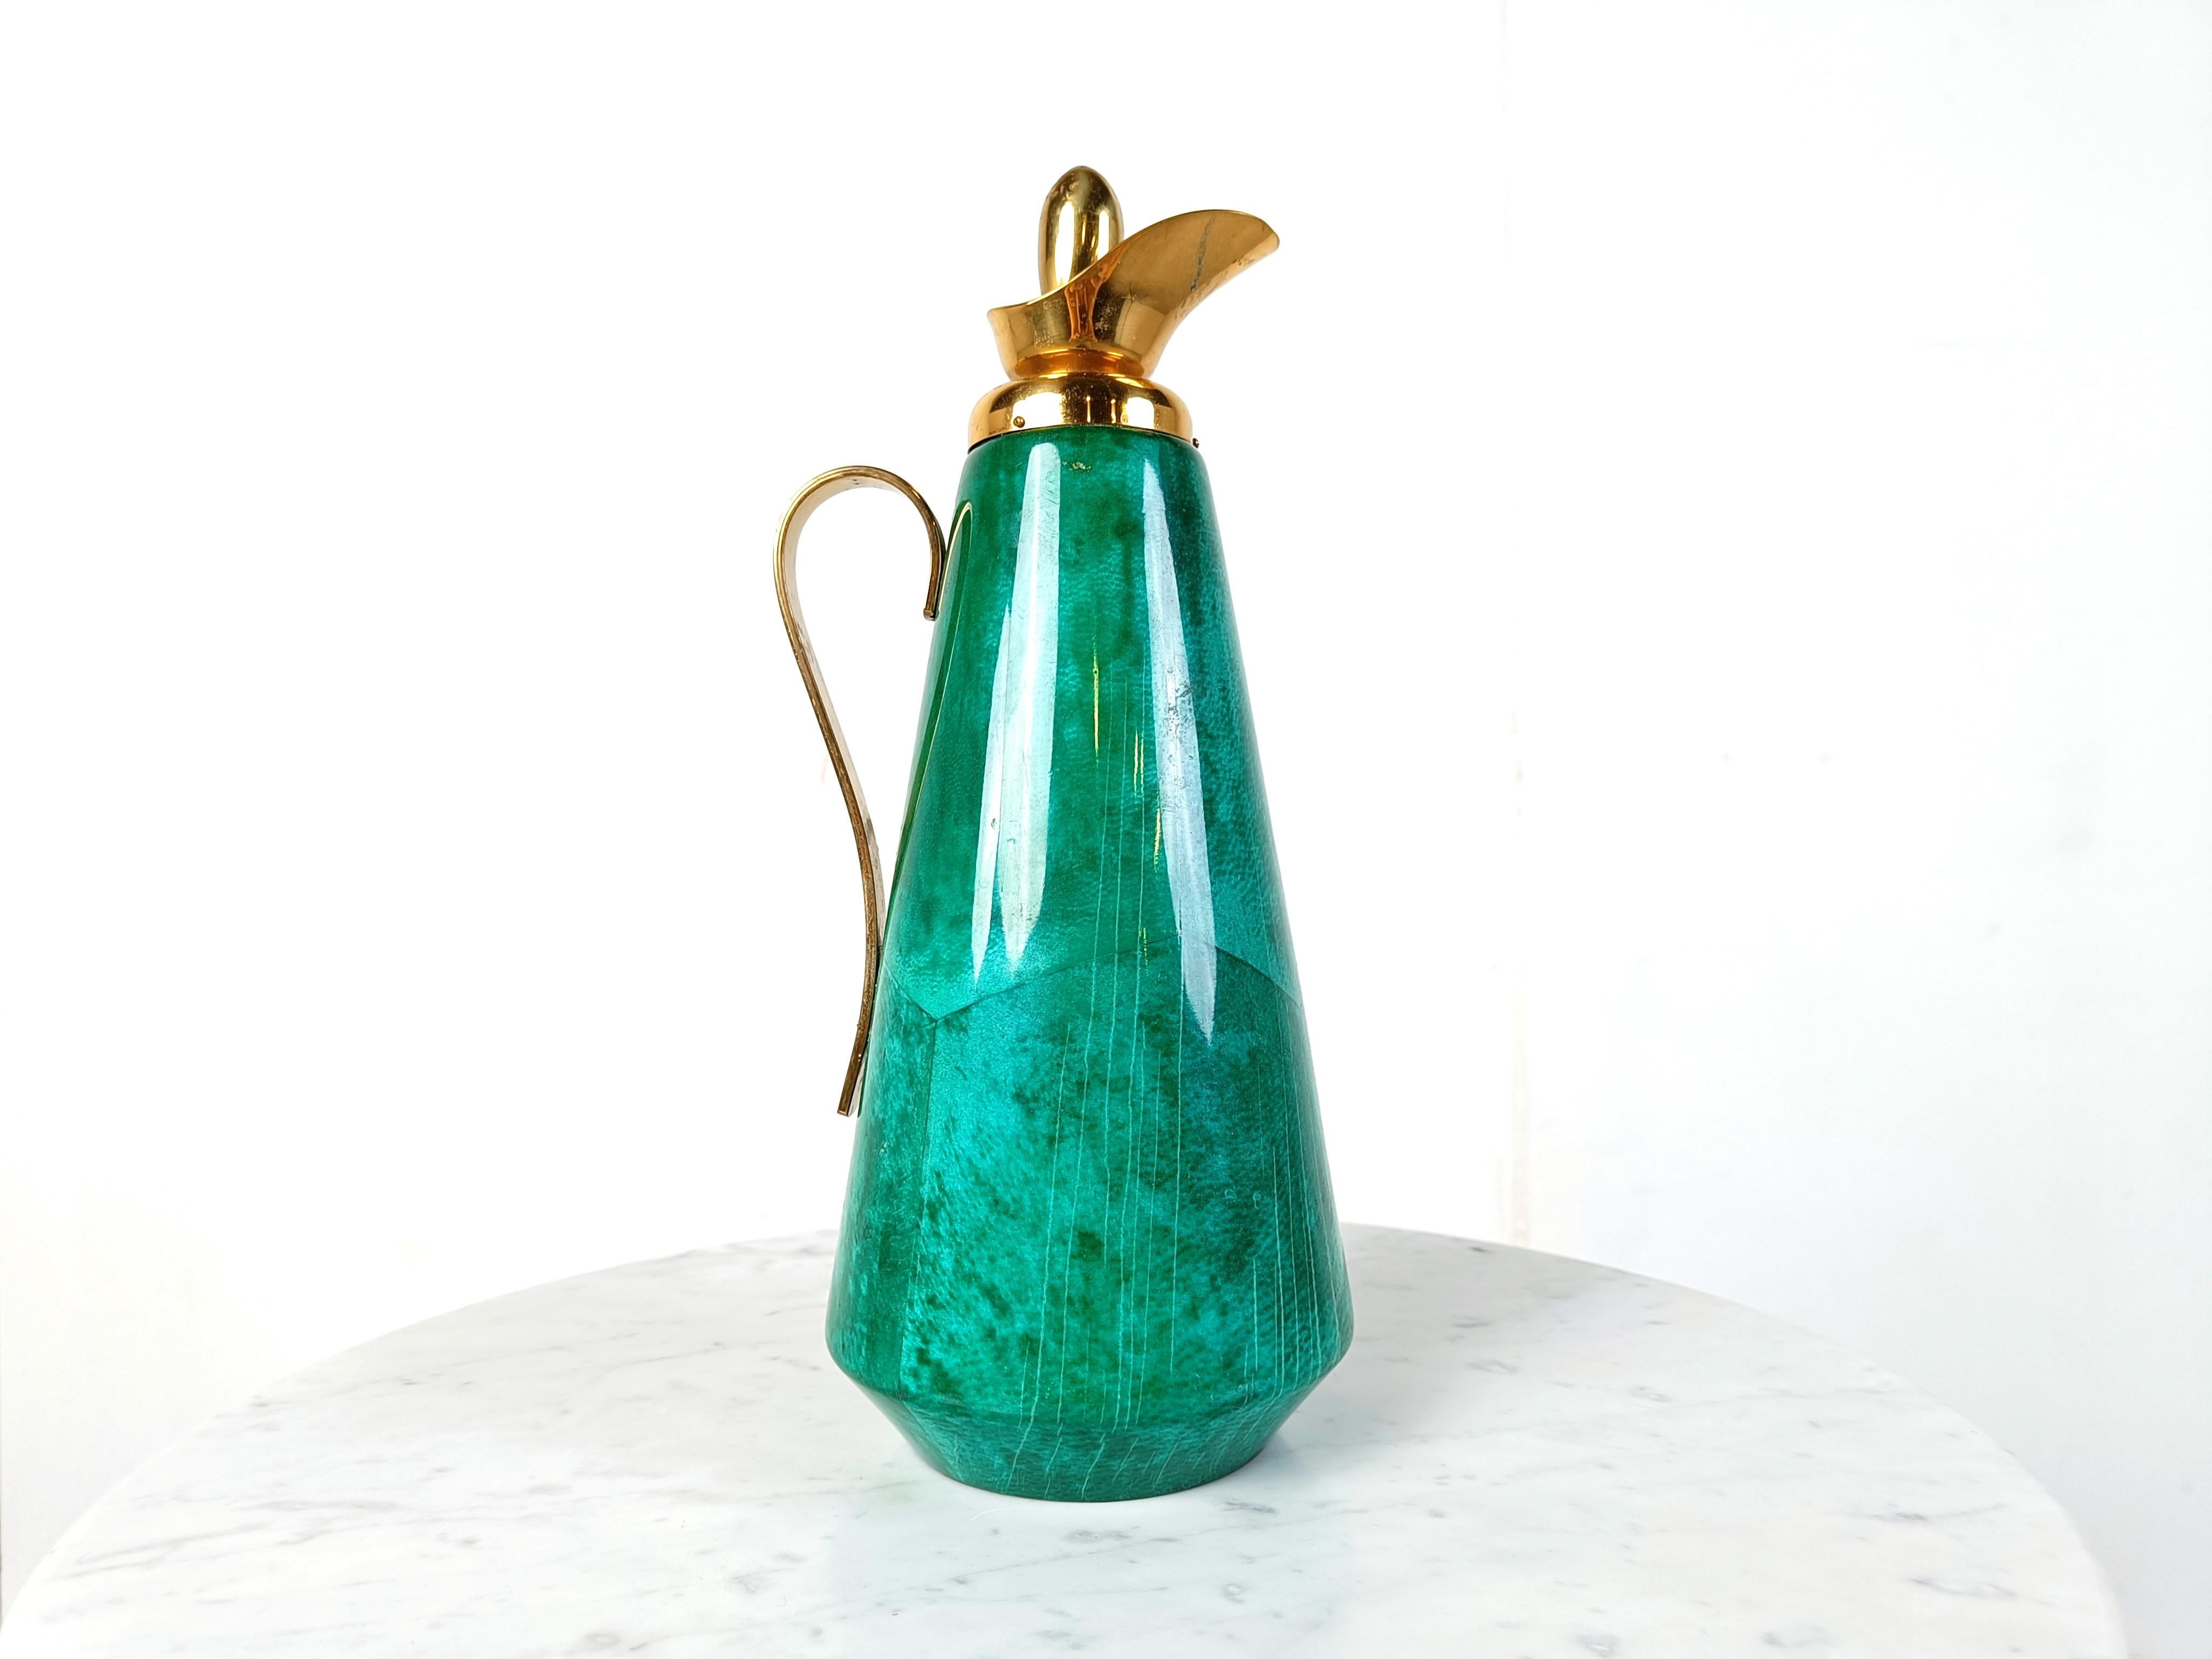 Vintage carafe by Aldo tura made from lacquered goatskin in a nice green colour and brass hardware..

Elegant shaped carafe with a beautiful colour

Good looking vintage addition for your bar. 

1960s - Italy

Labeled underneath

Height: